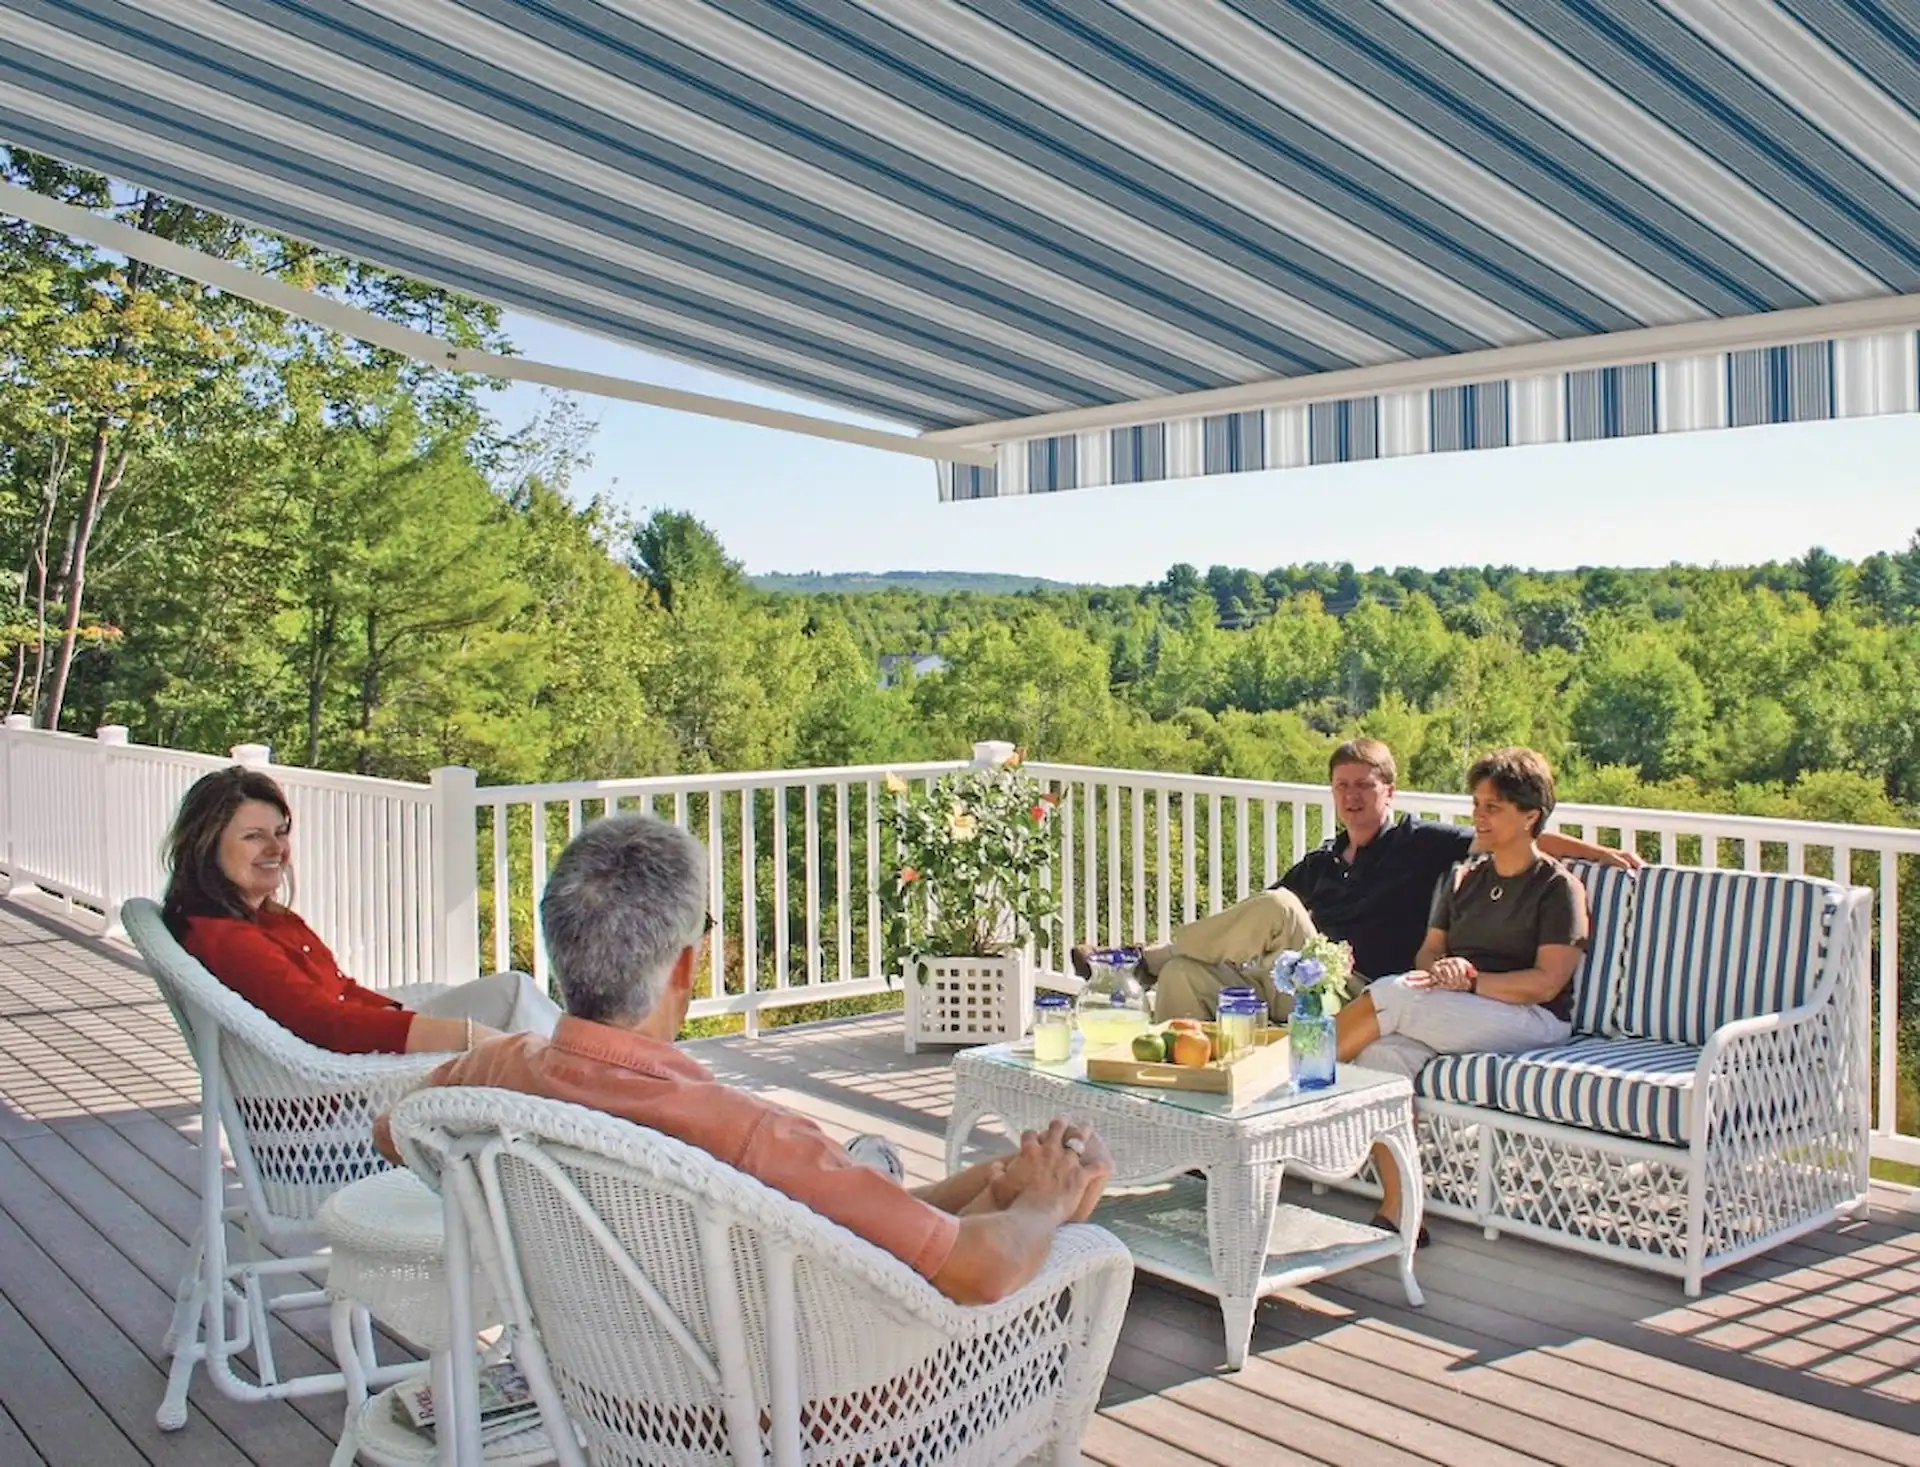 Medium shot of four guests enjoying a drink on a patio covered by a striped retractable awning.